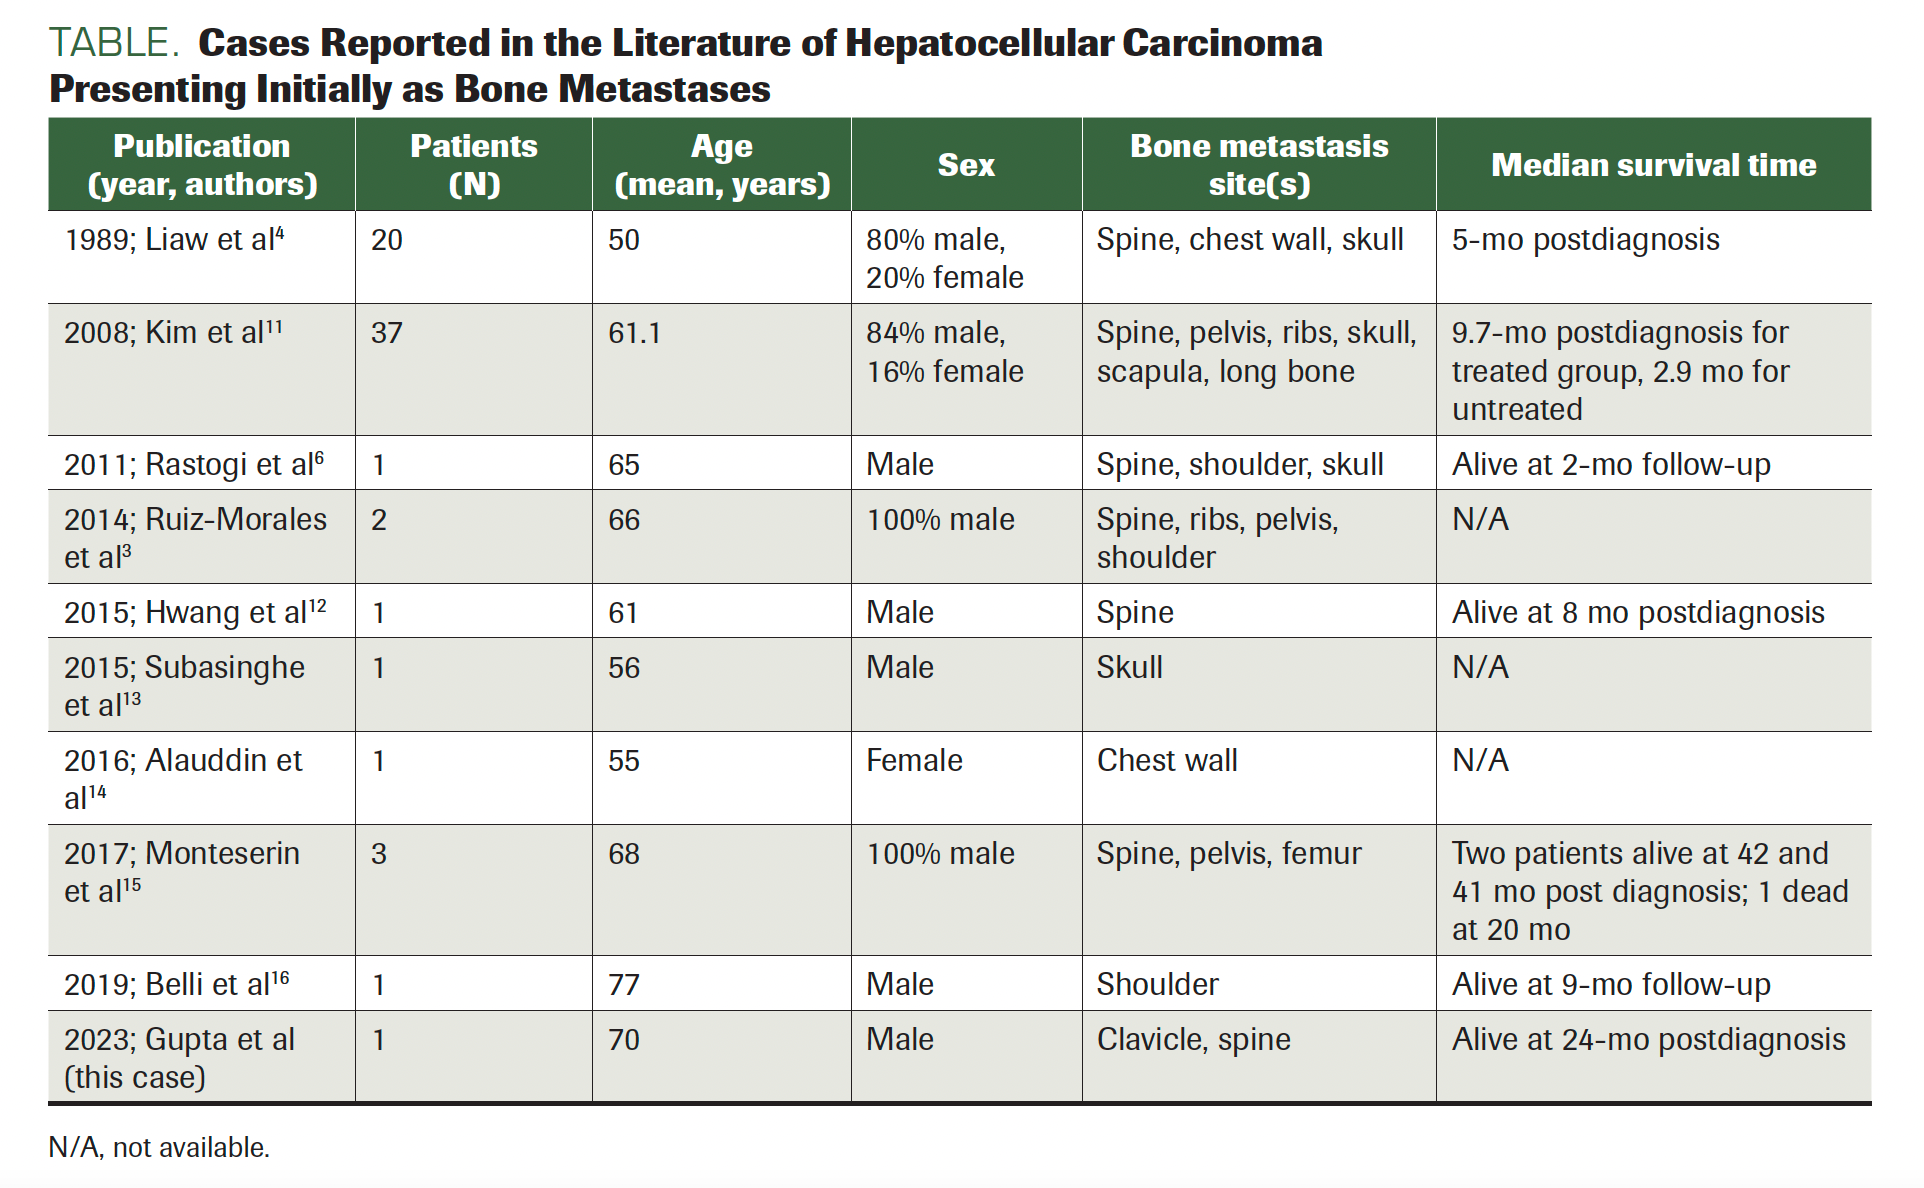 TABLE. Cases Reported in the Literature of Hepatocellular Carcinoma Presenting Initially as Bone Metastases